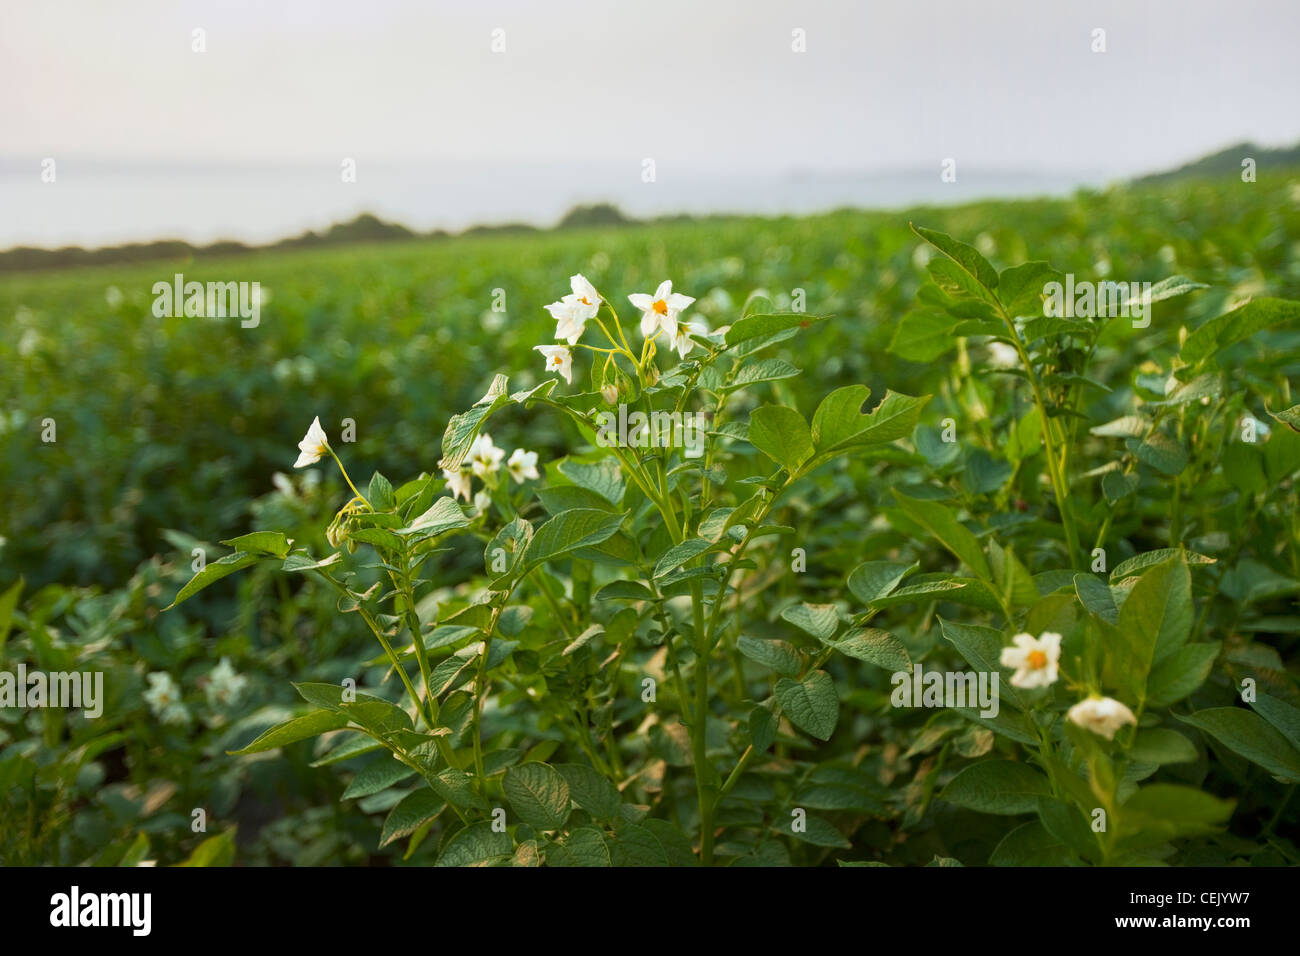 Mid growth blooming potato plants at a local family produce farm with the Sakonnet River in the background / Rhode Island, USA. Stock Photo